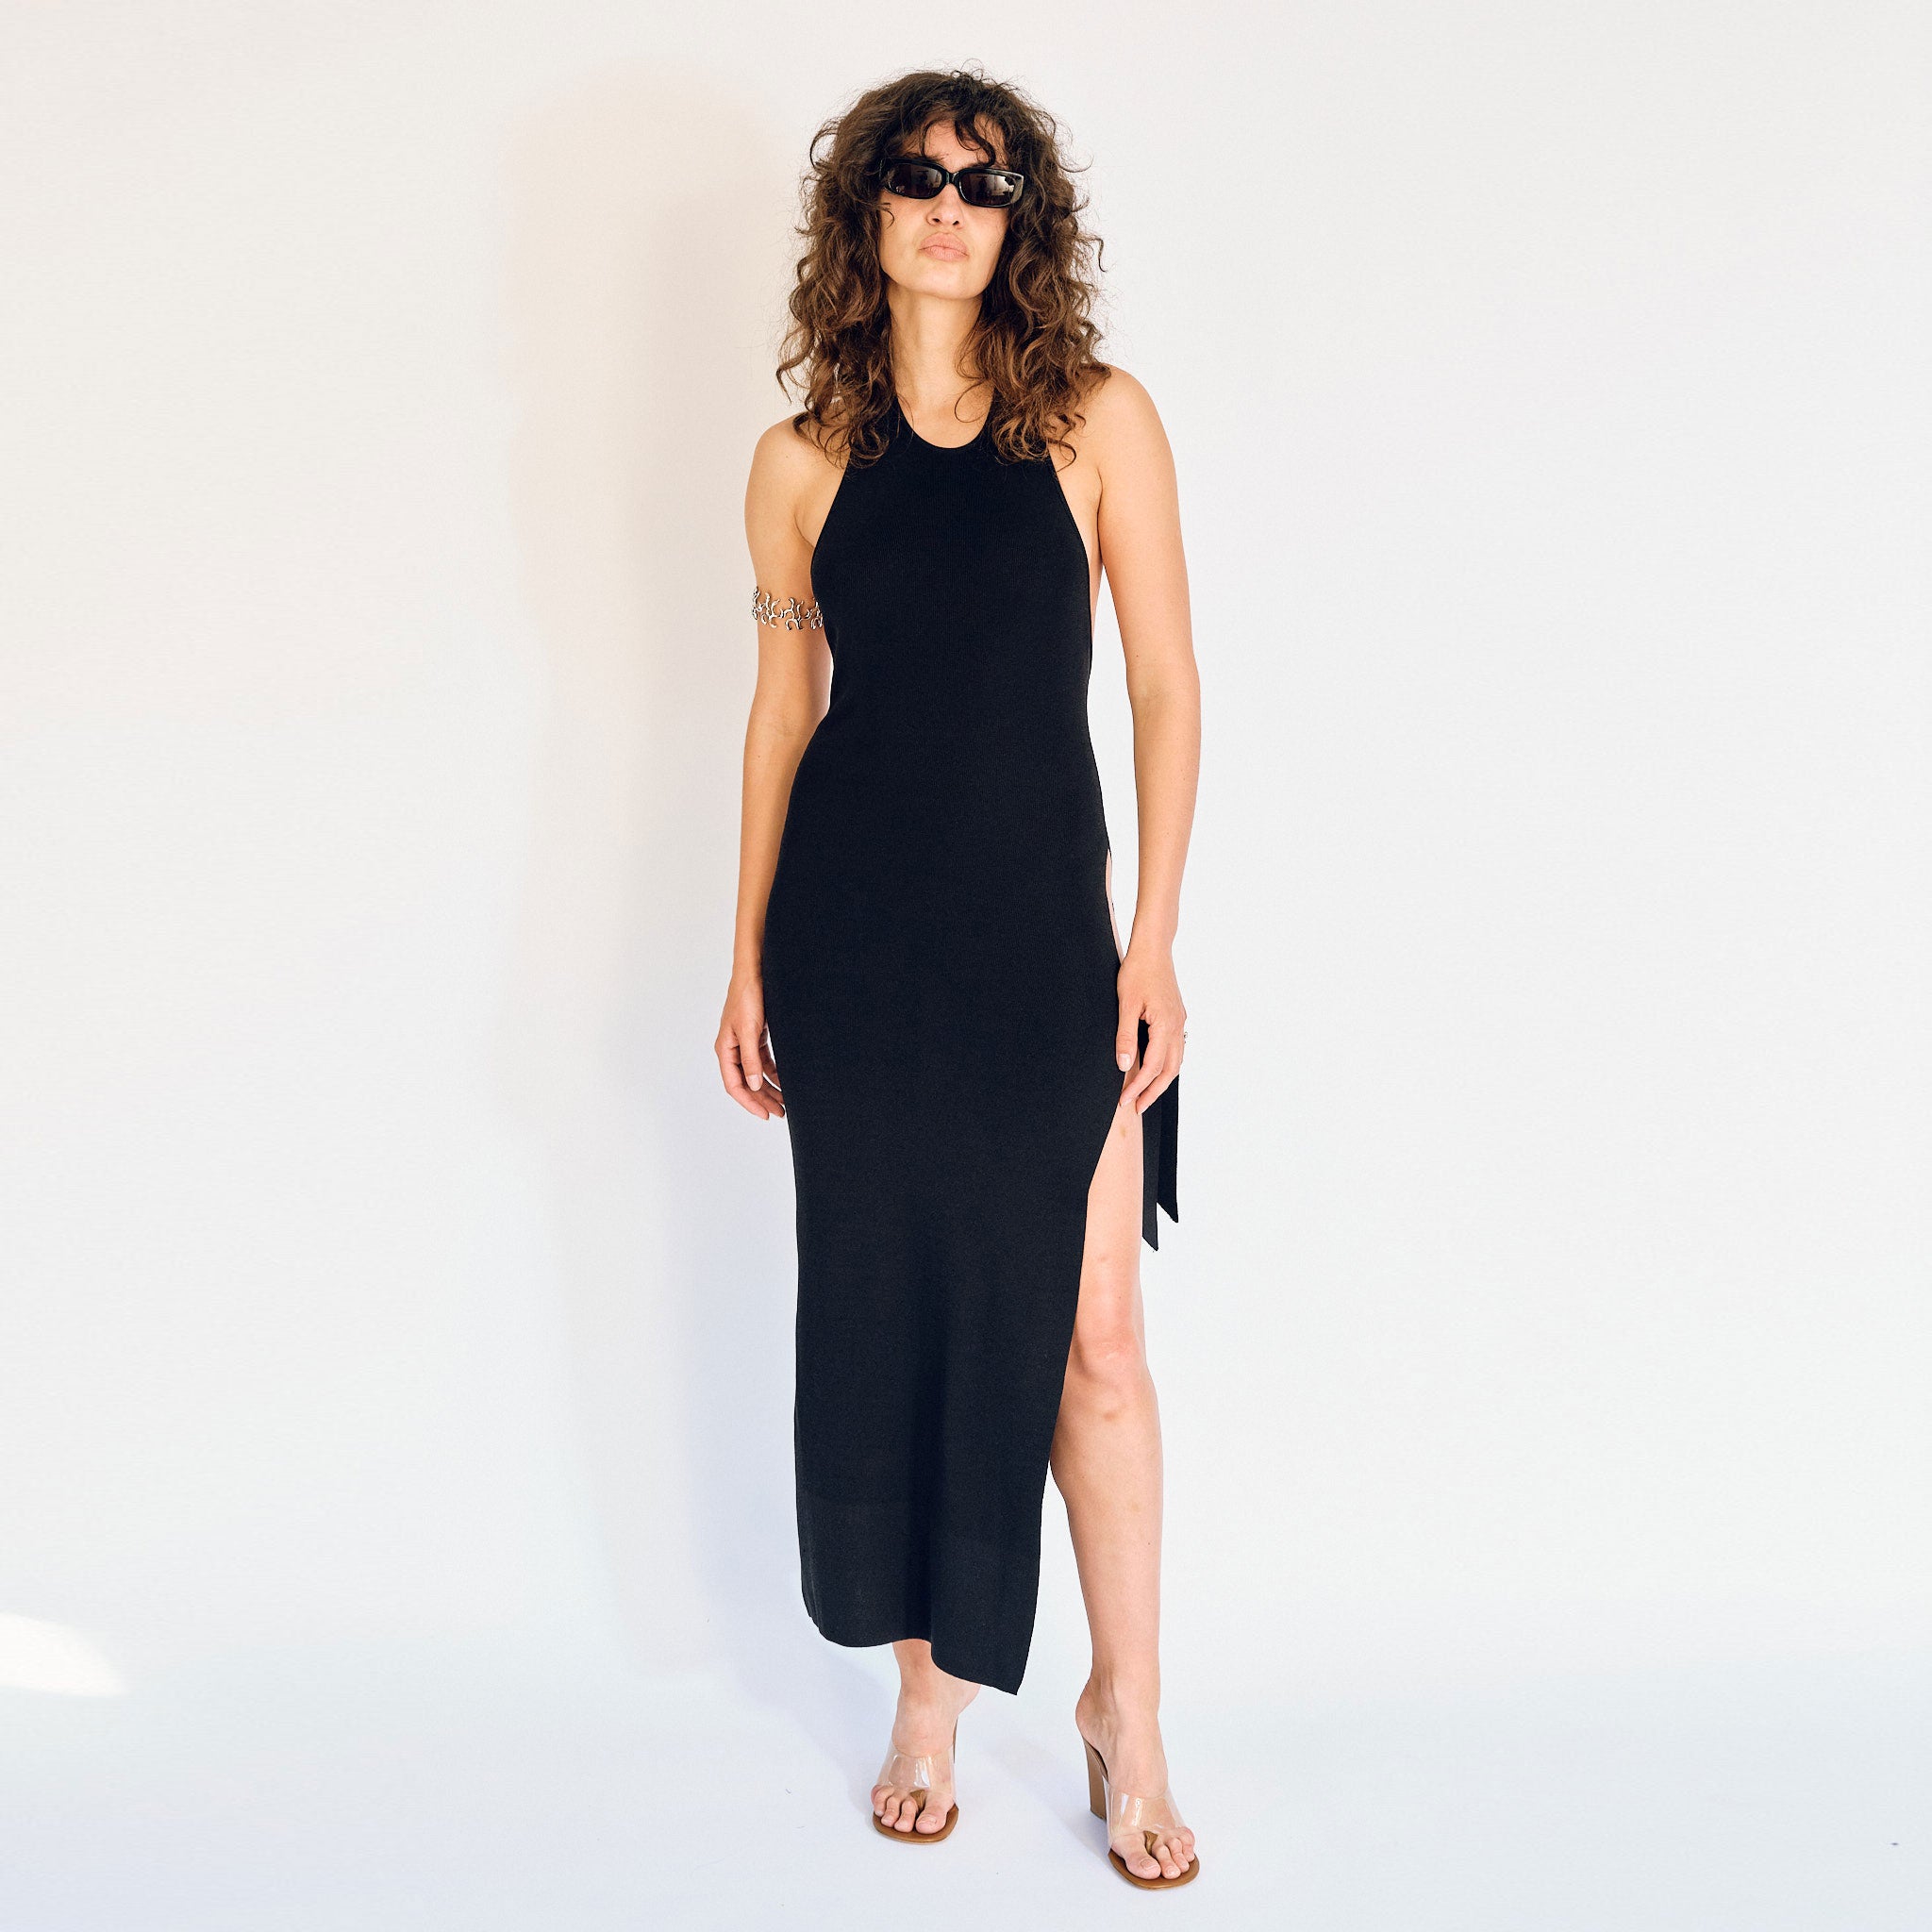 A model wears the Simon Miller Junjo tank style dress in black, with high side slits along the left leg - front view.